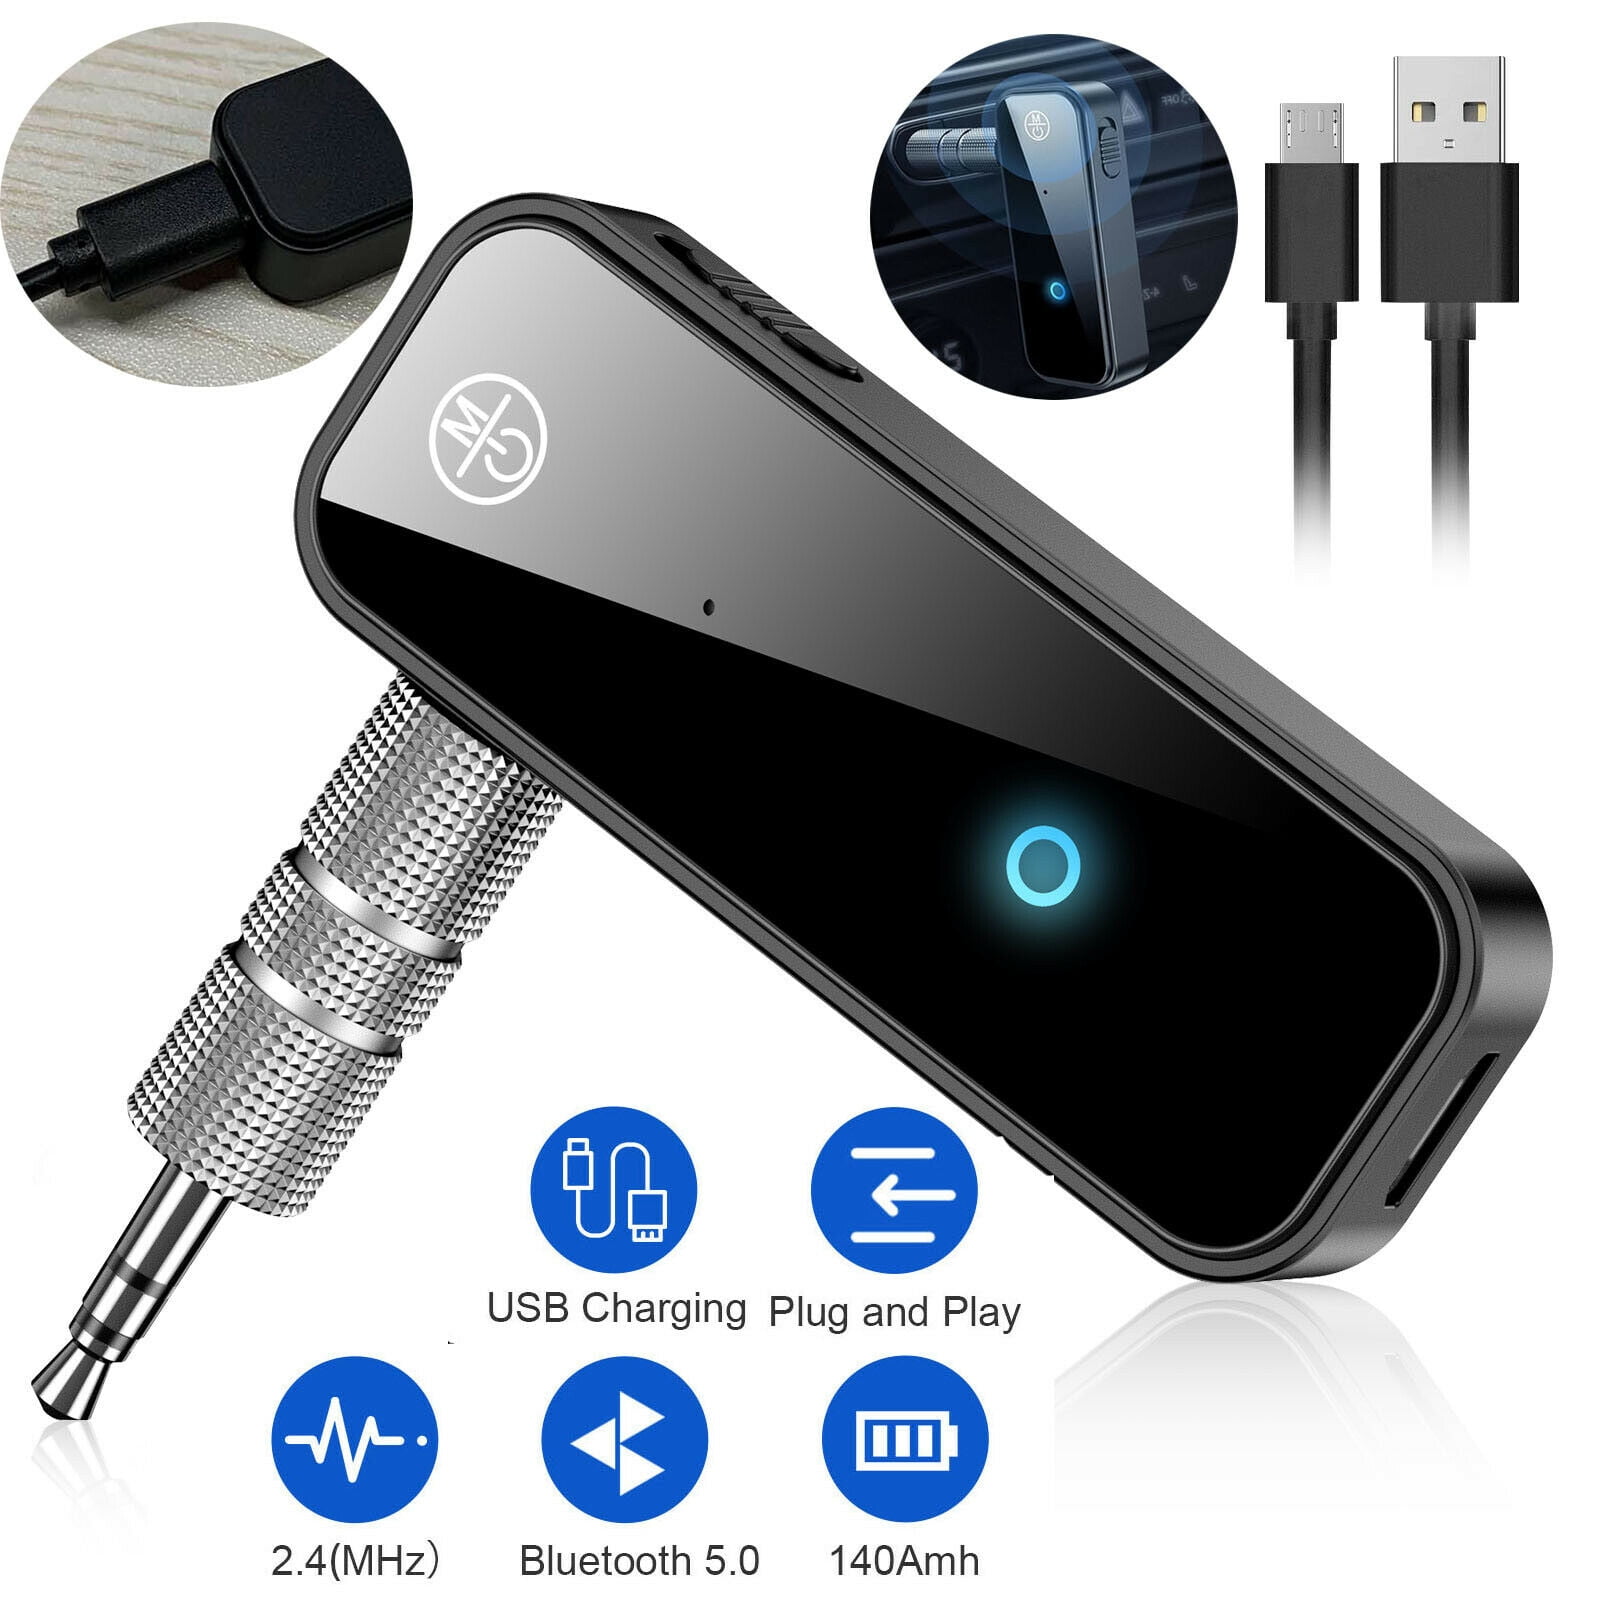 Black Bluetooth 5.0 Receiver Transmitter 2 in 1 Wireless Adapter 3.5mm Jack for Car Music Audio Aux Headphone Handsfree 1PCS Bluetooth 5.0 Transmitter and Receiver